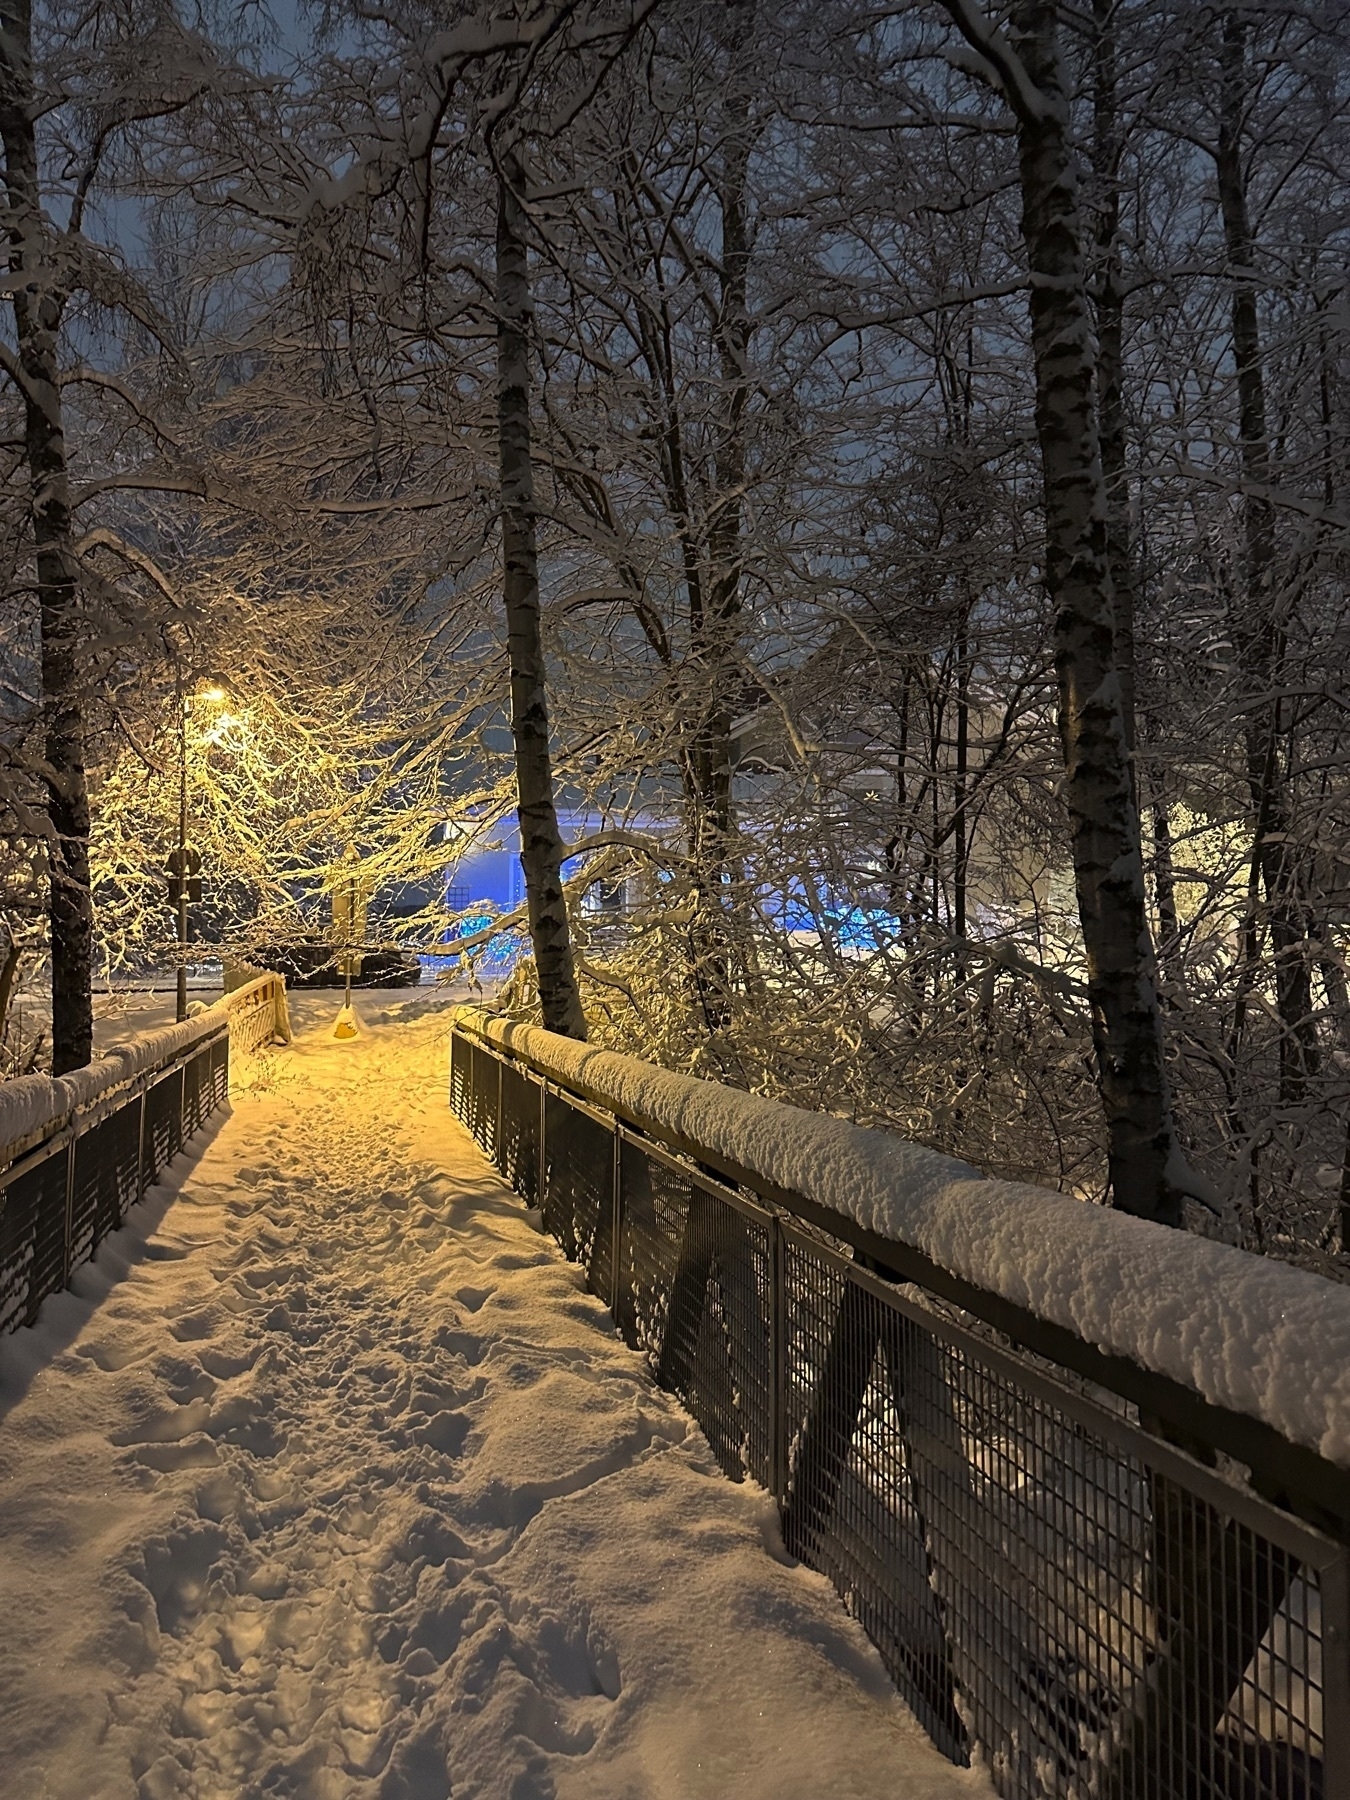 snowy bridge leading to snowy trees and distant houses